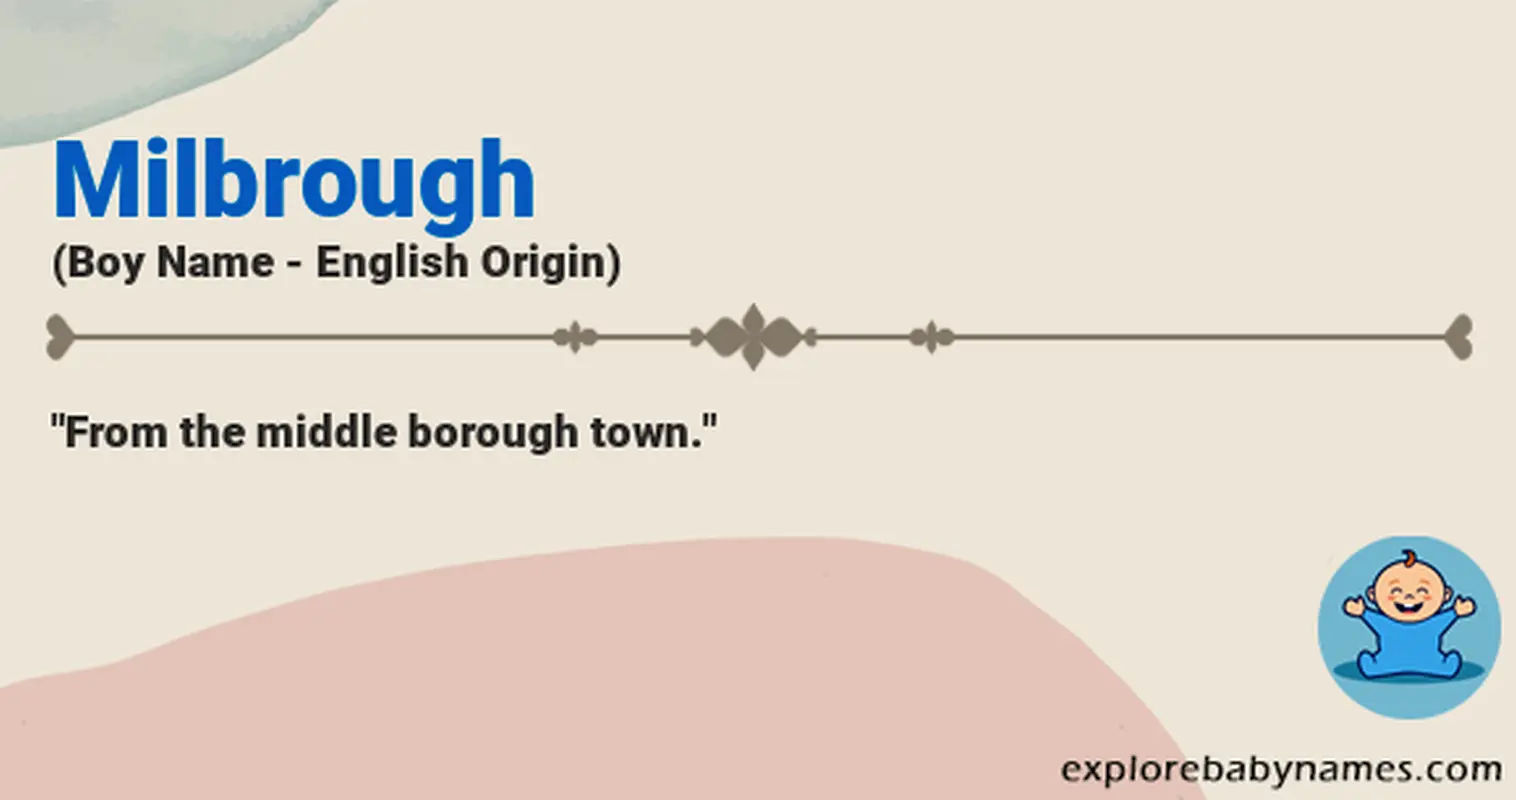 Meaning of Milbrough